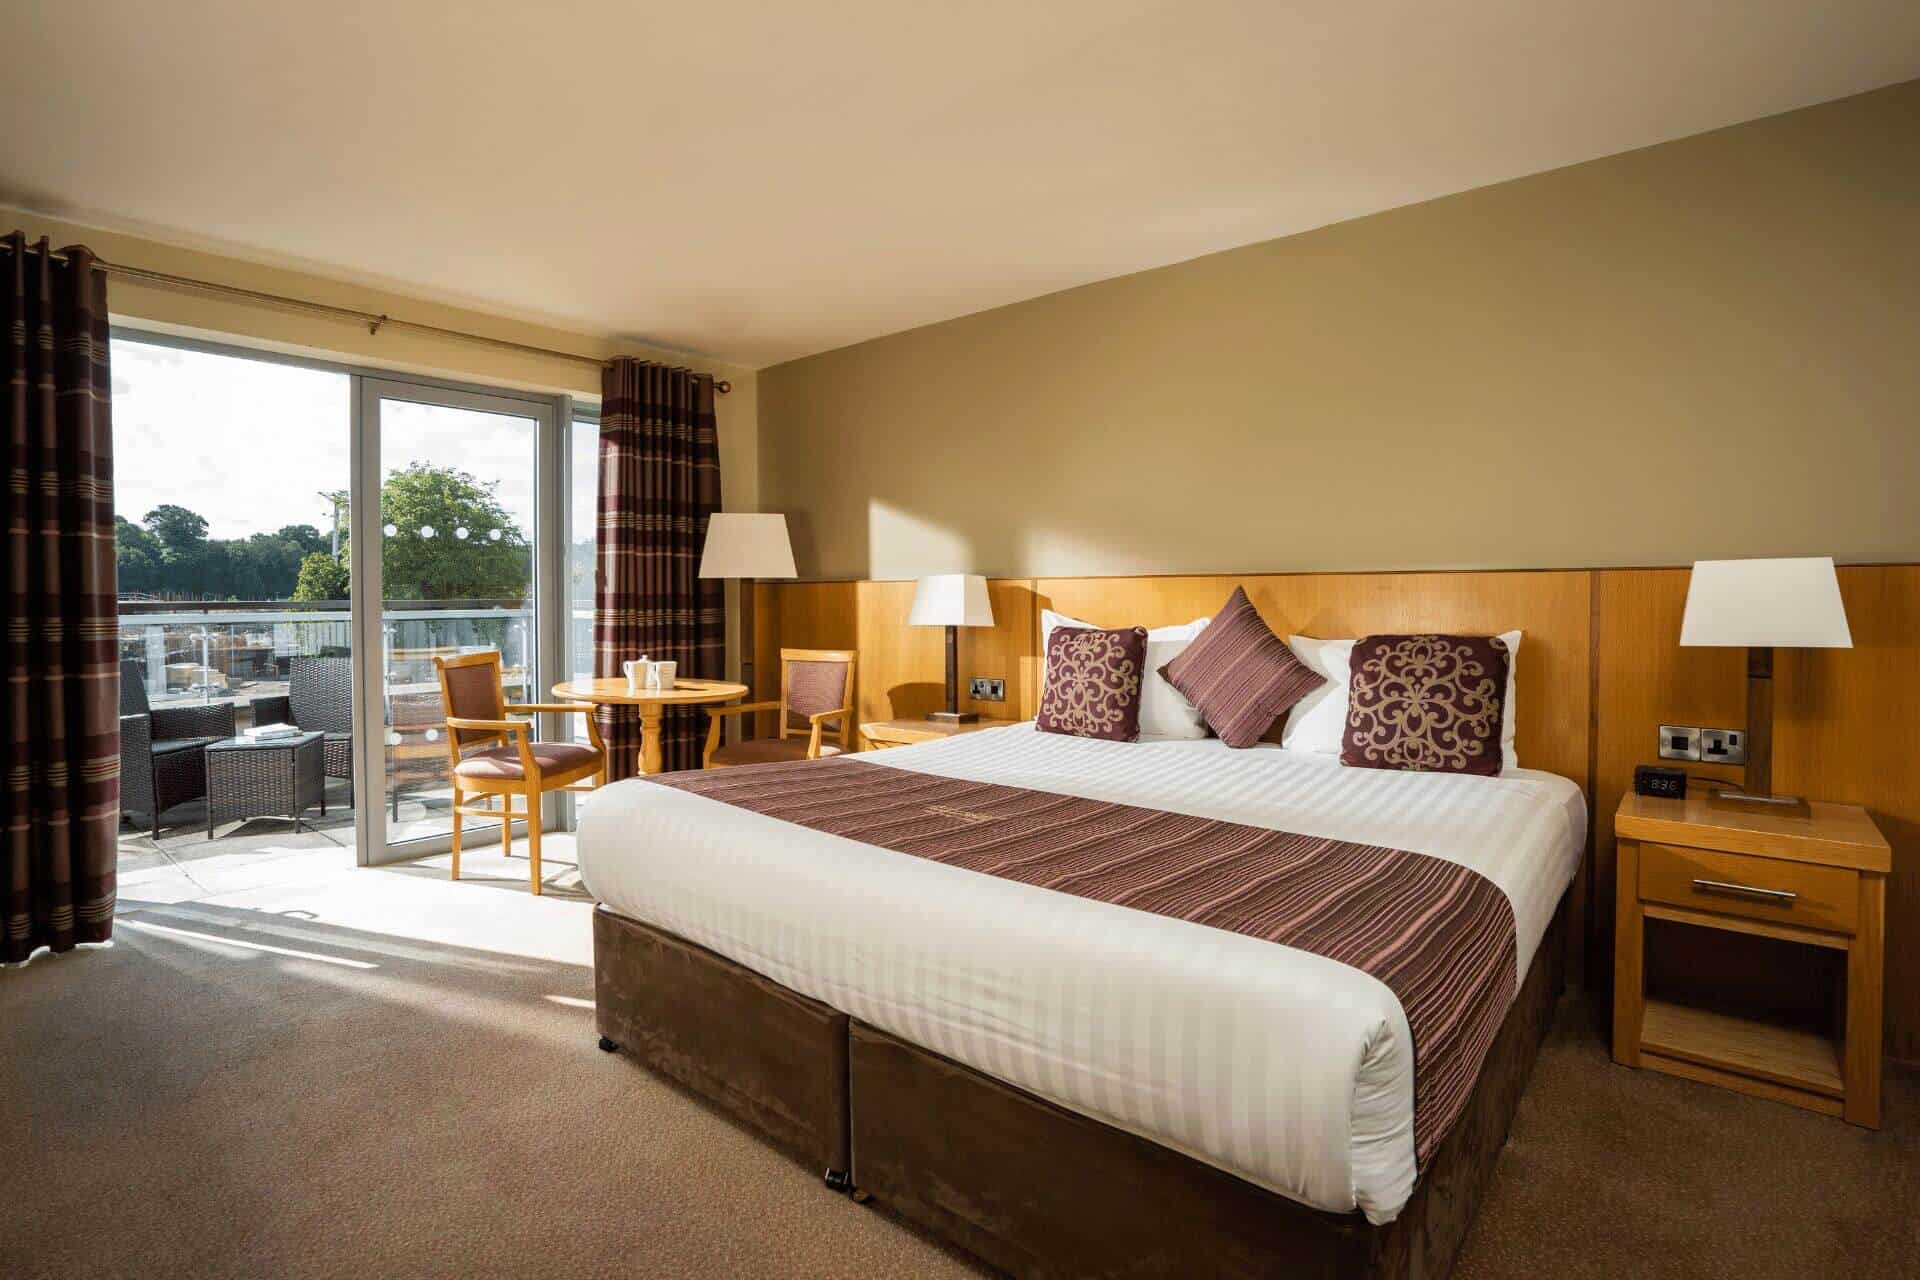 Luxury Accommodation in Enniskillen, Executive Rooms and Suites